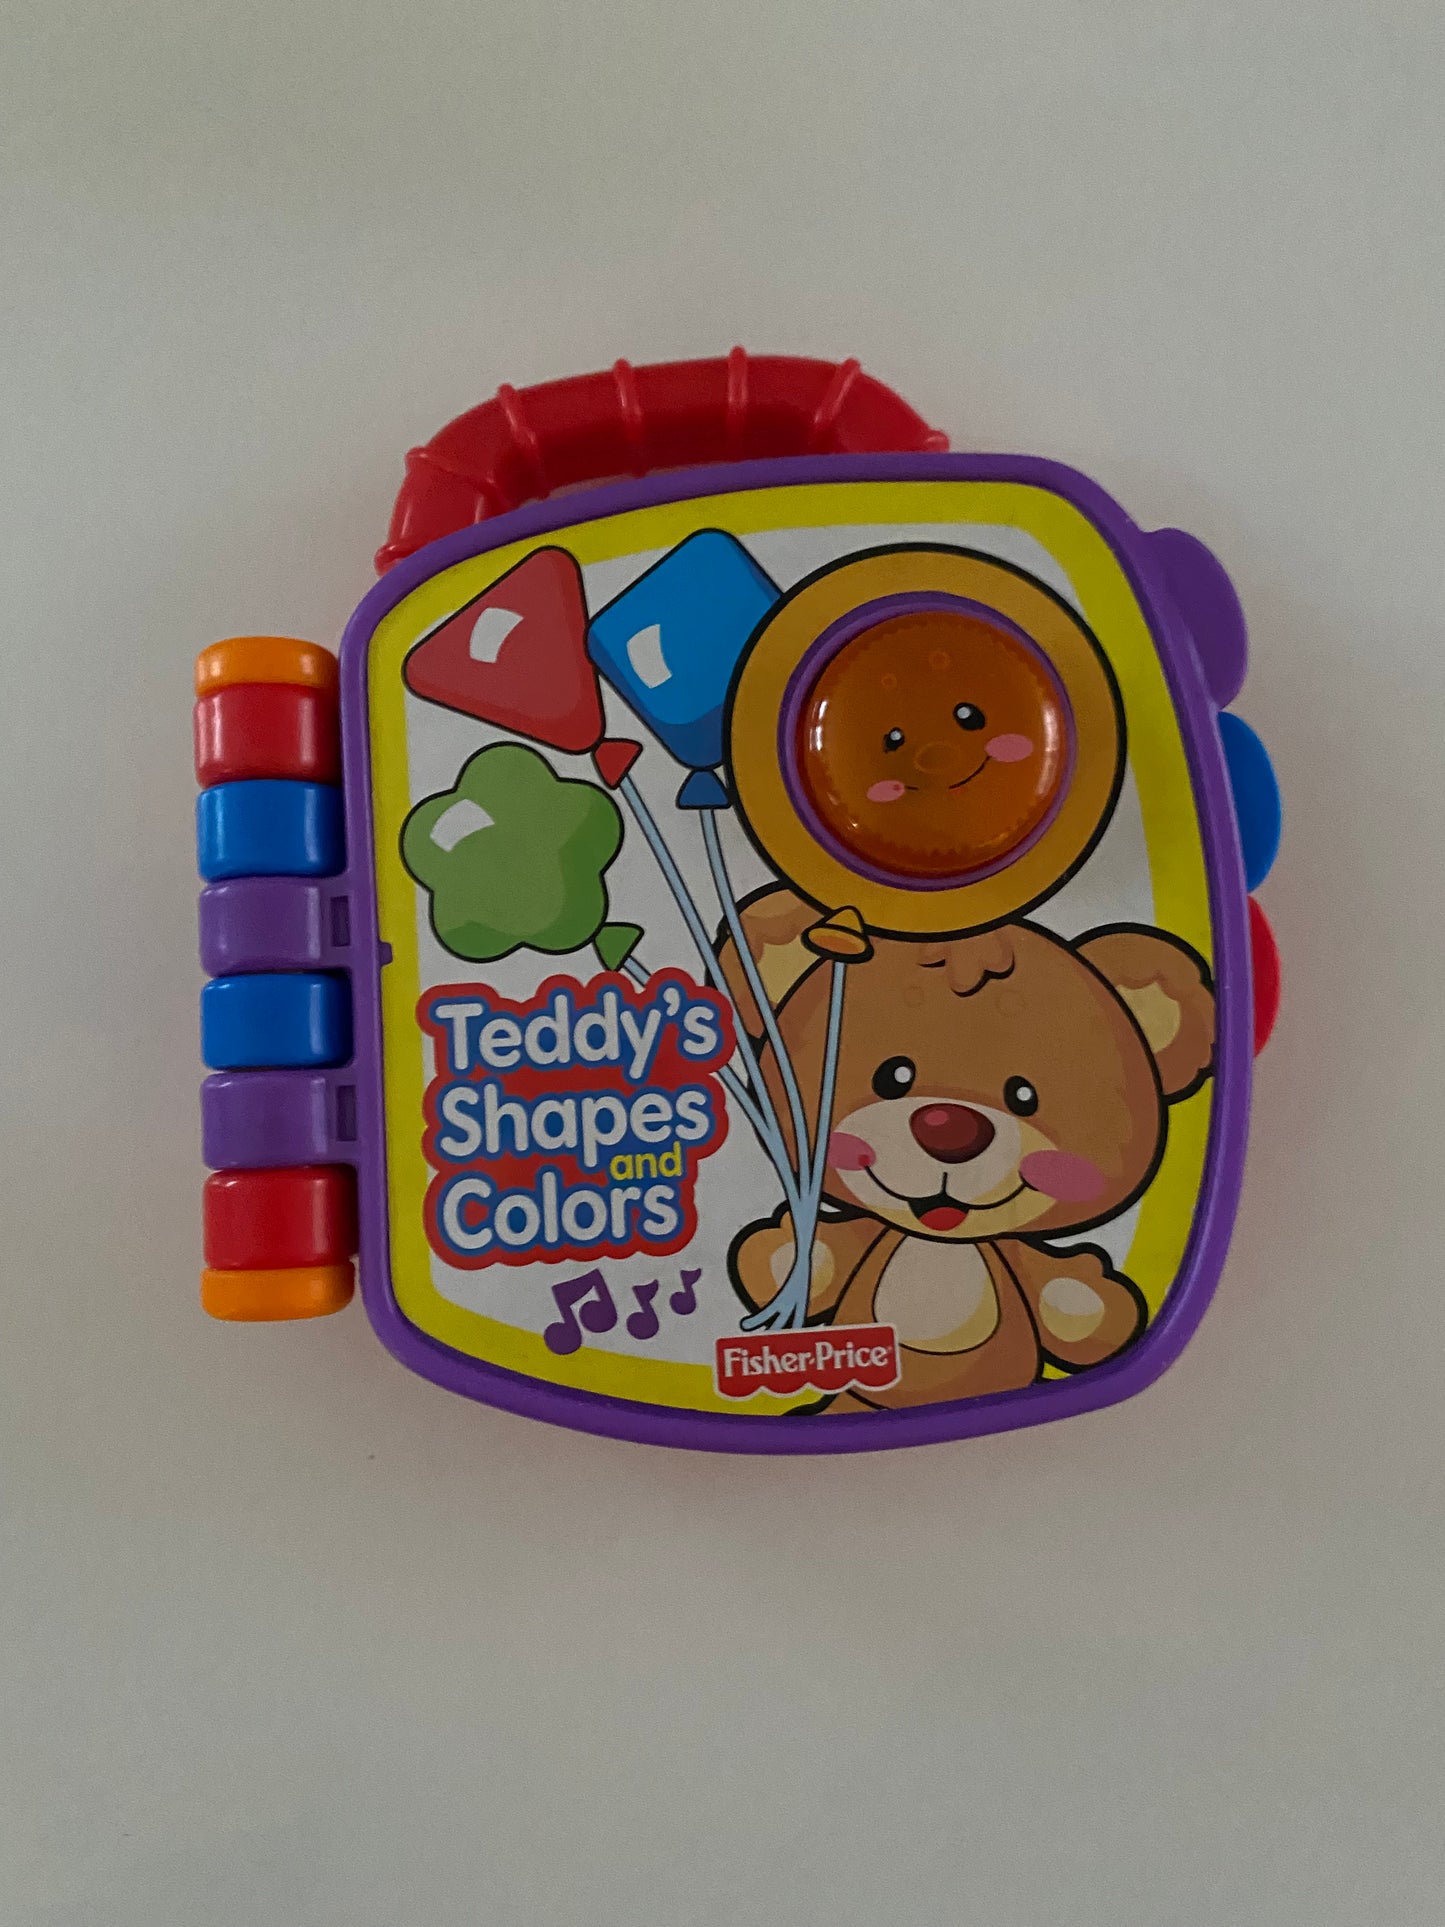 Fisher-Price Teddy’s Shapes & Colors Book